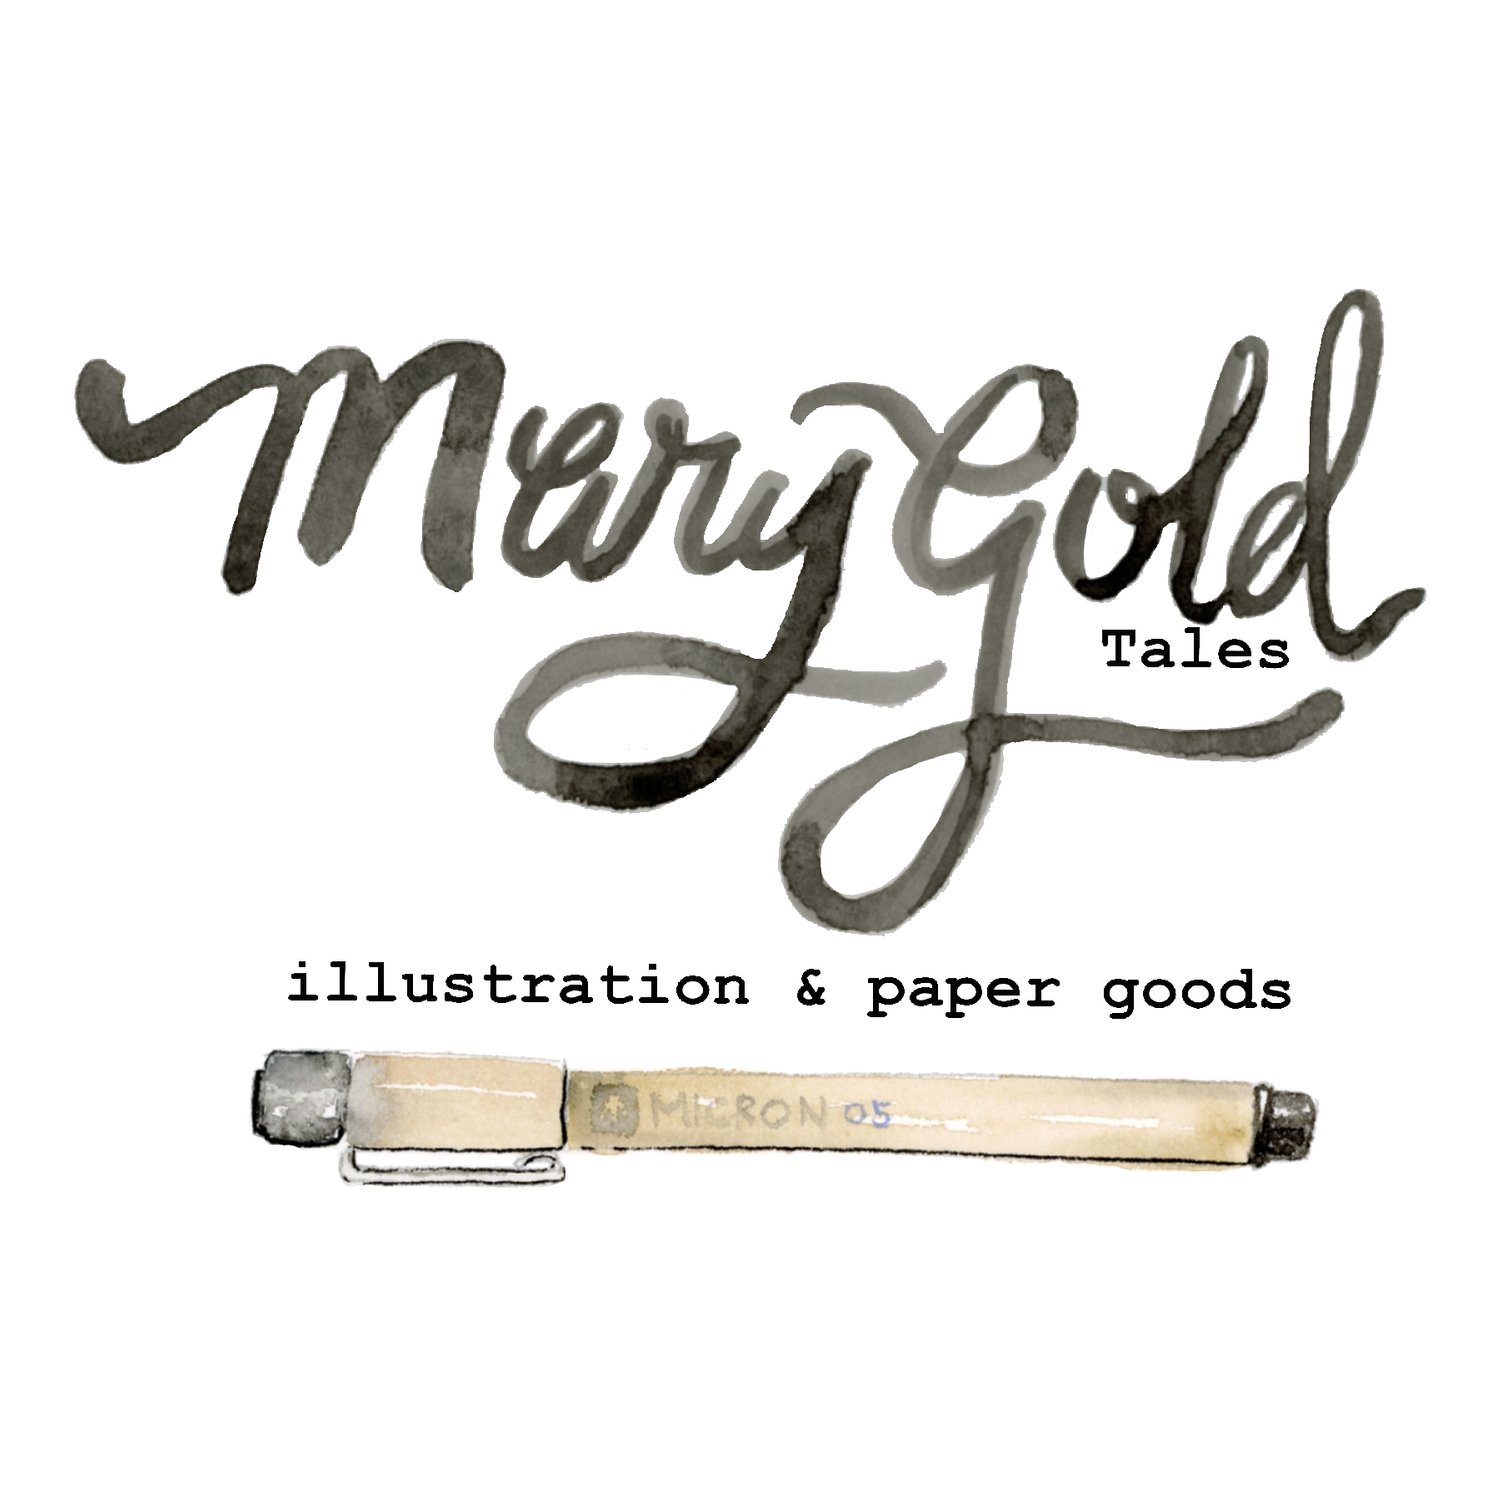 MaryGold Tales